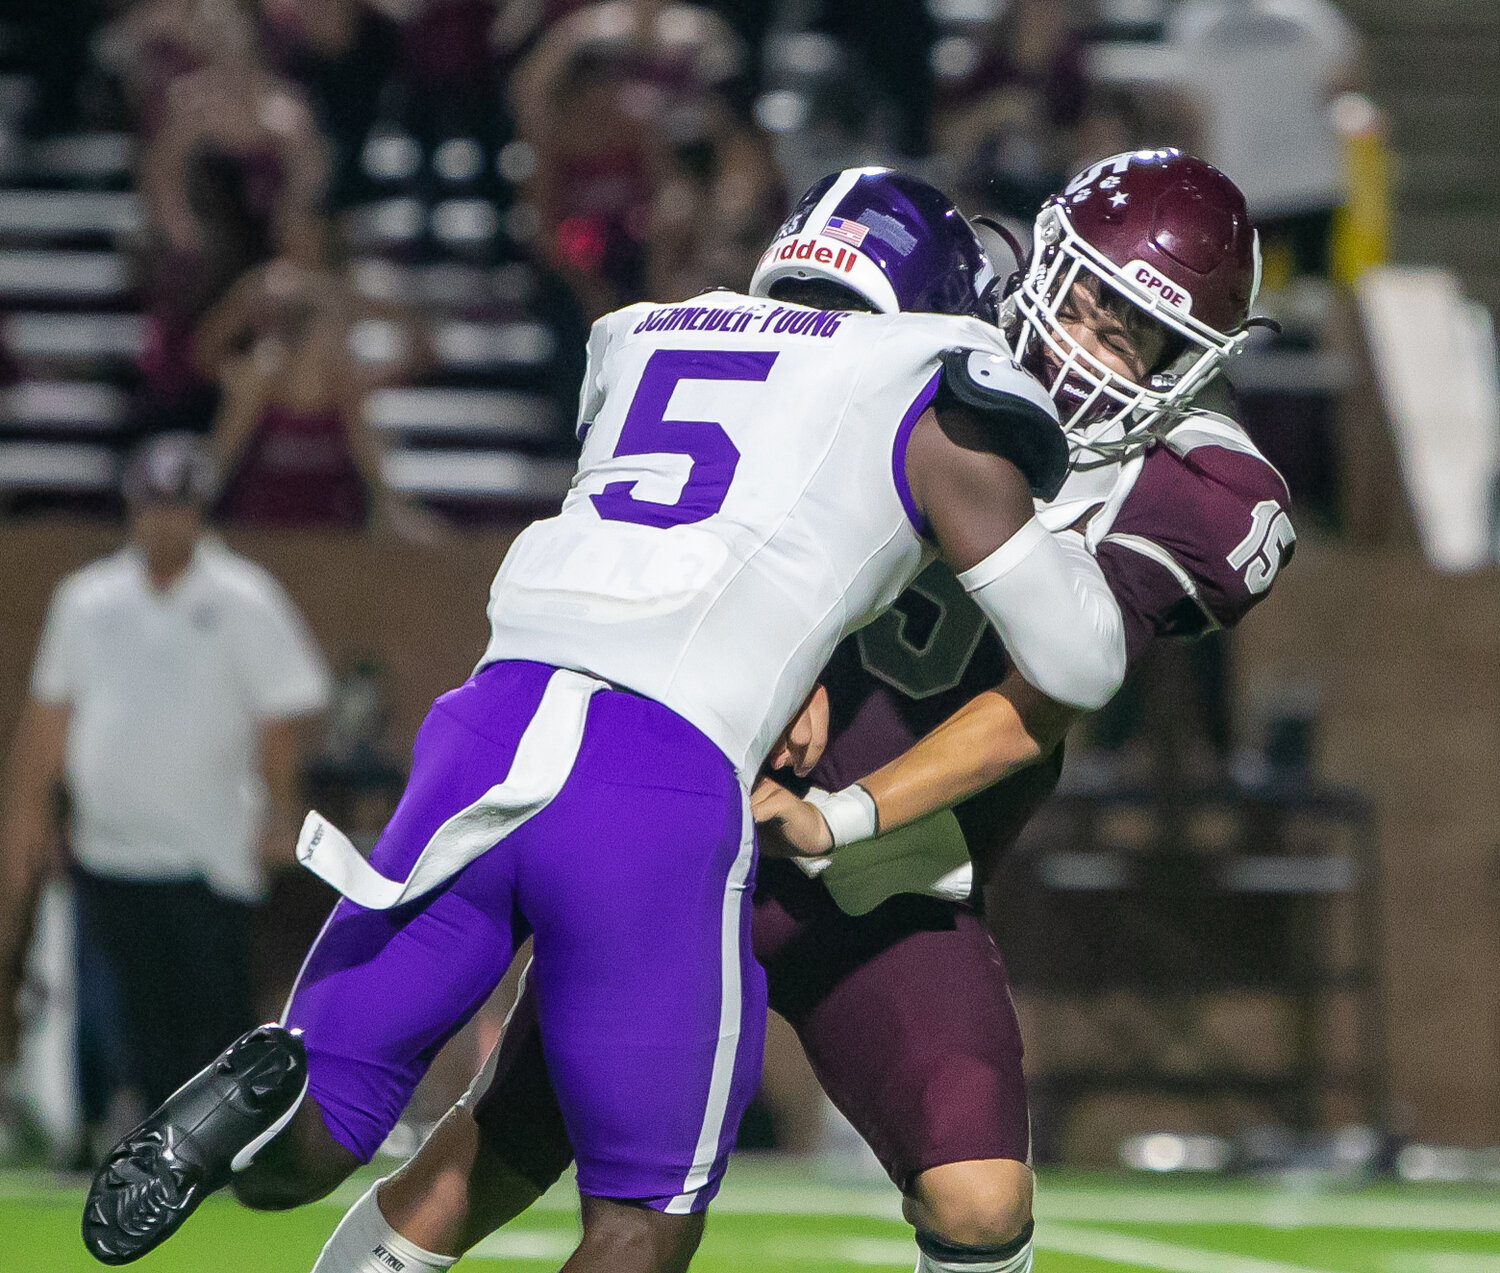 Davis Roup takes a hit from Kevin Schneider-Young after throwing a pass during Friday's District 19-6A game between Cinco Ranch and Morton Ranch on Friday at Rhodes Stadium.